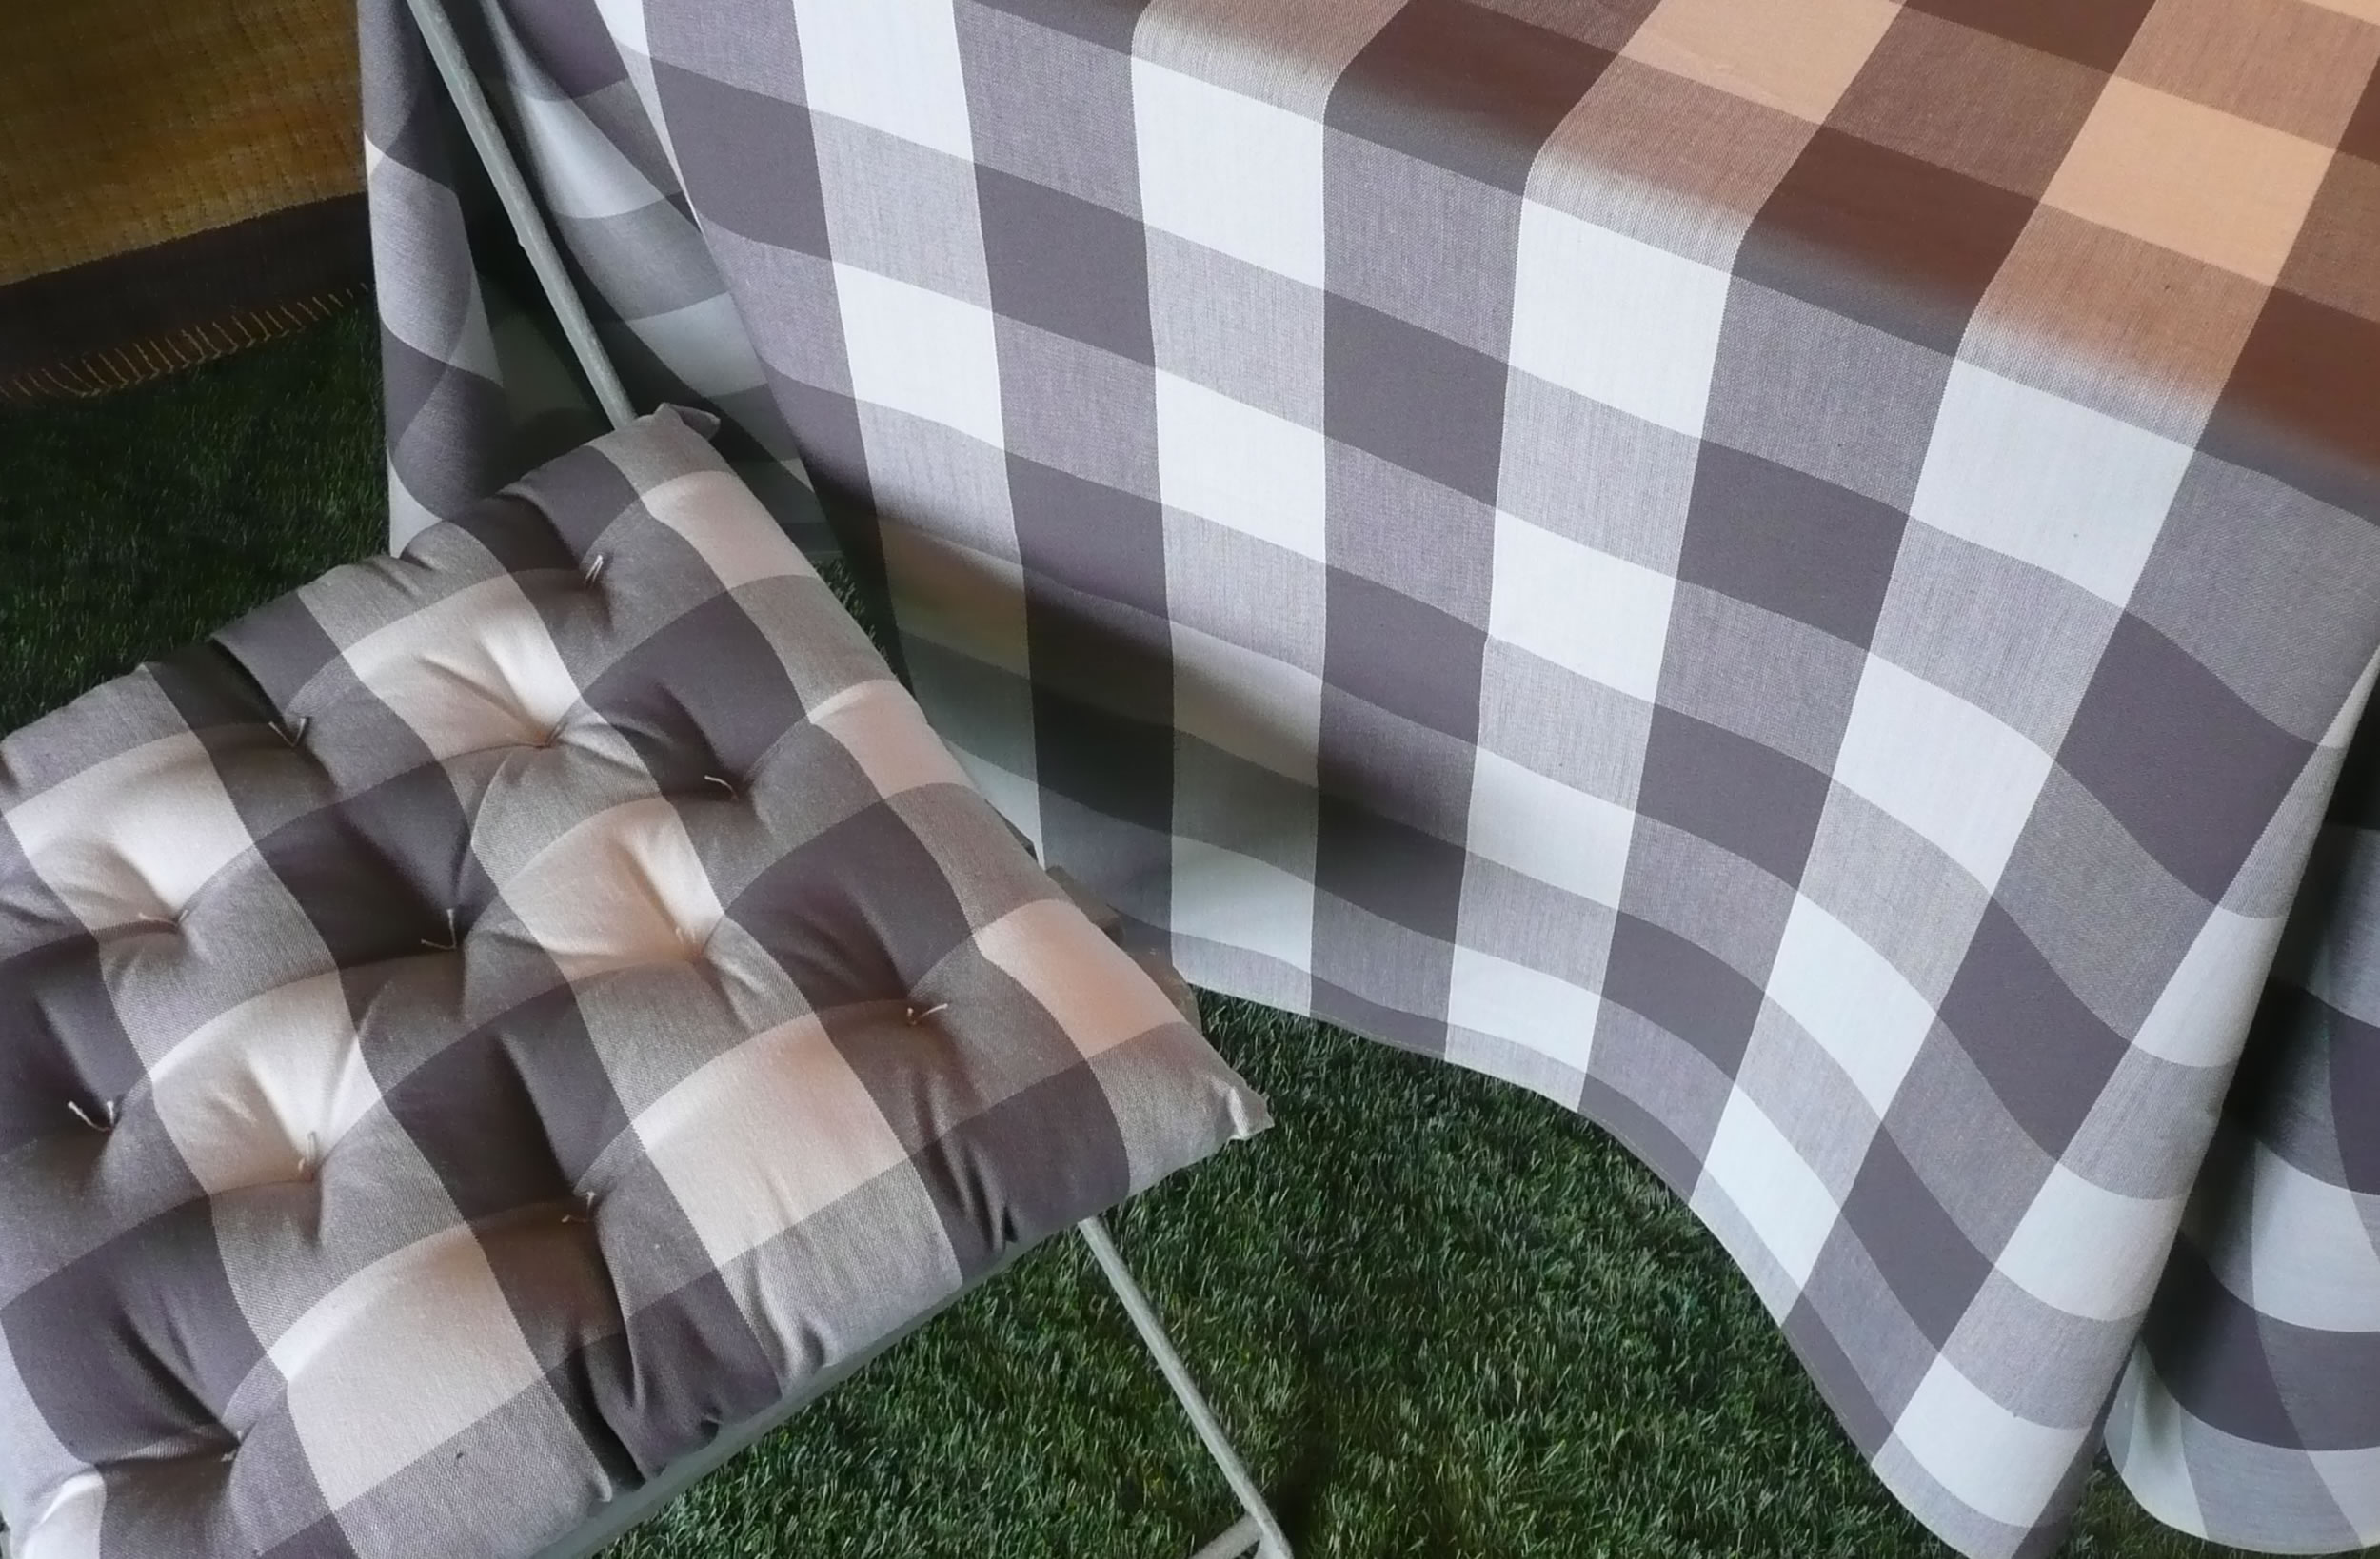 Large Check Gingham Tablecloths - Grey and White Checks